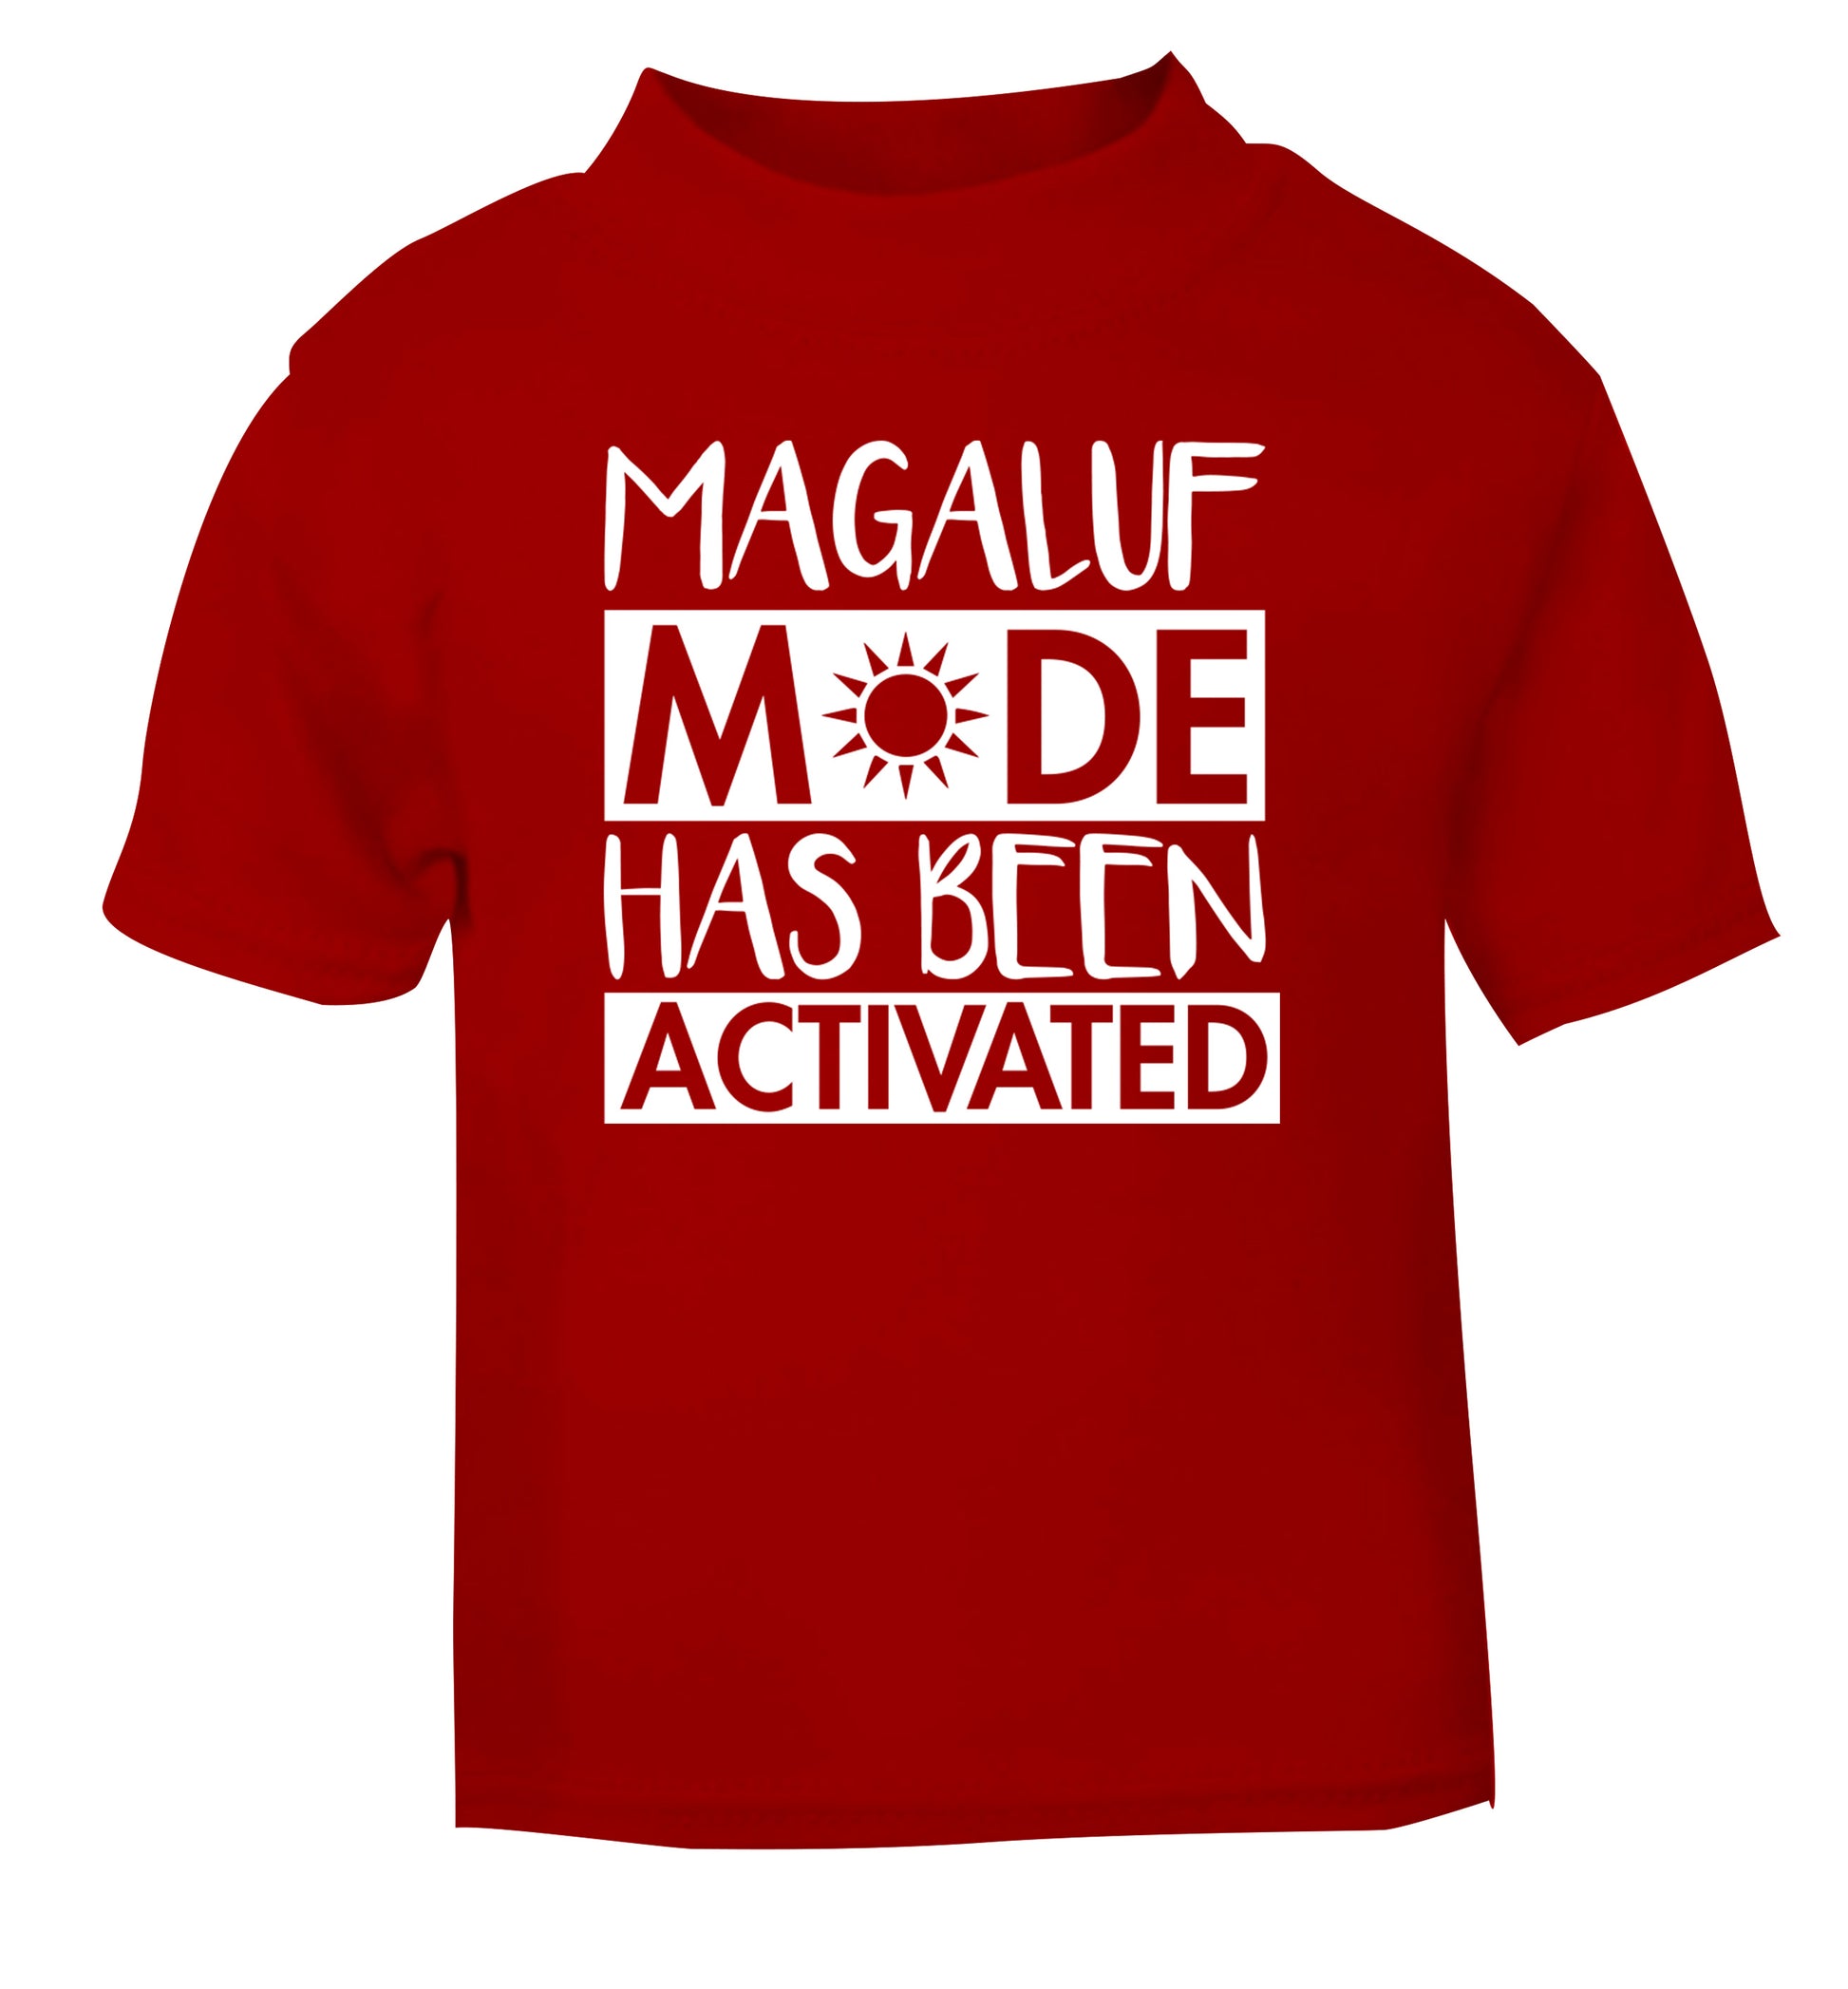 Magaluf mode has been activated red Baby Toddler Tshirt 2 Years